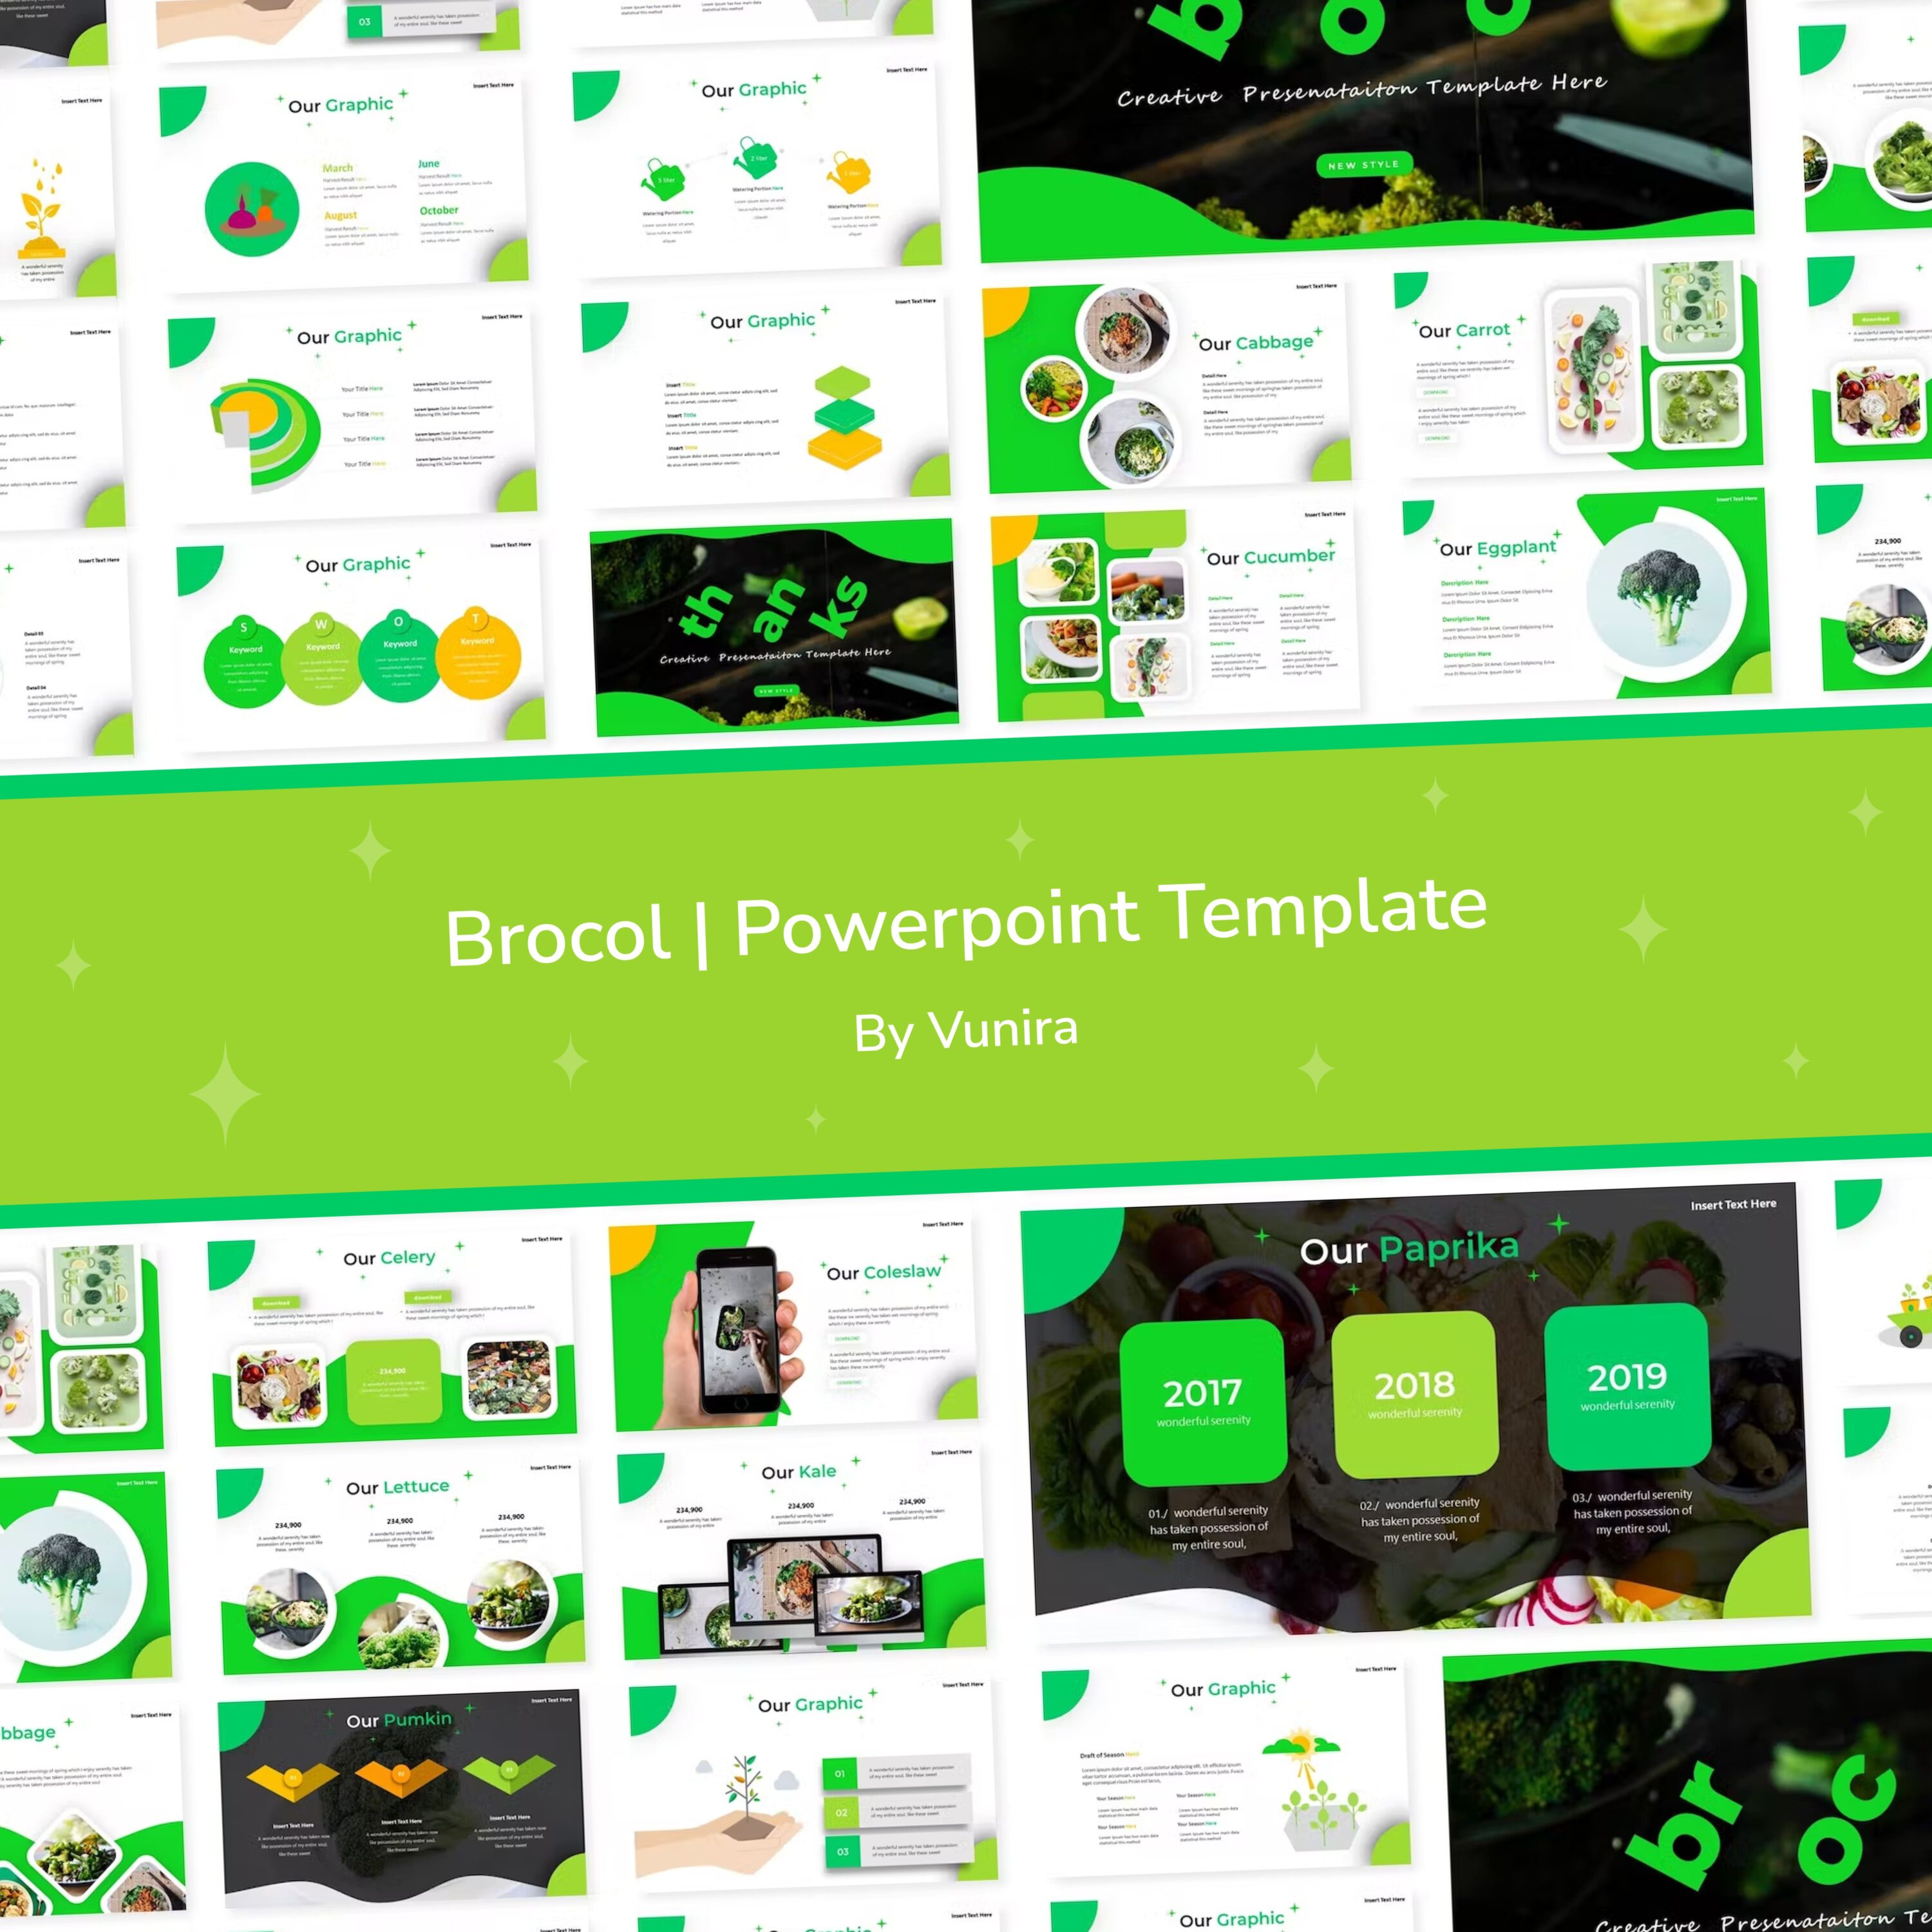 Brocol | Powerpoint Template- main image preview.